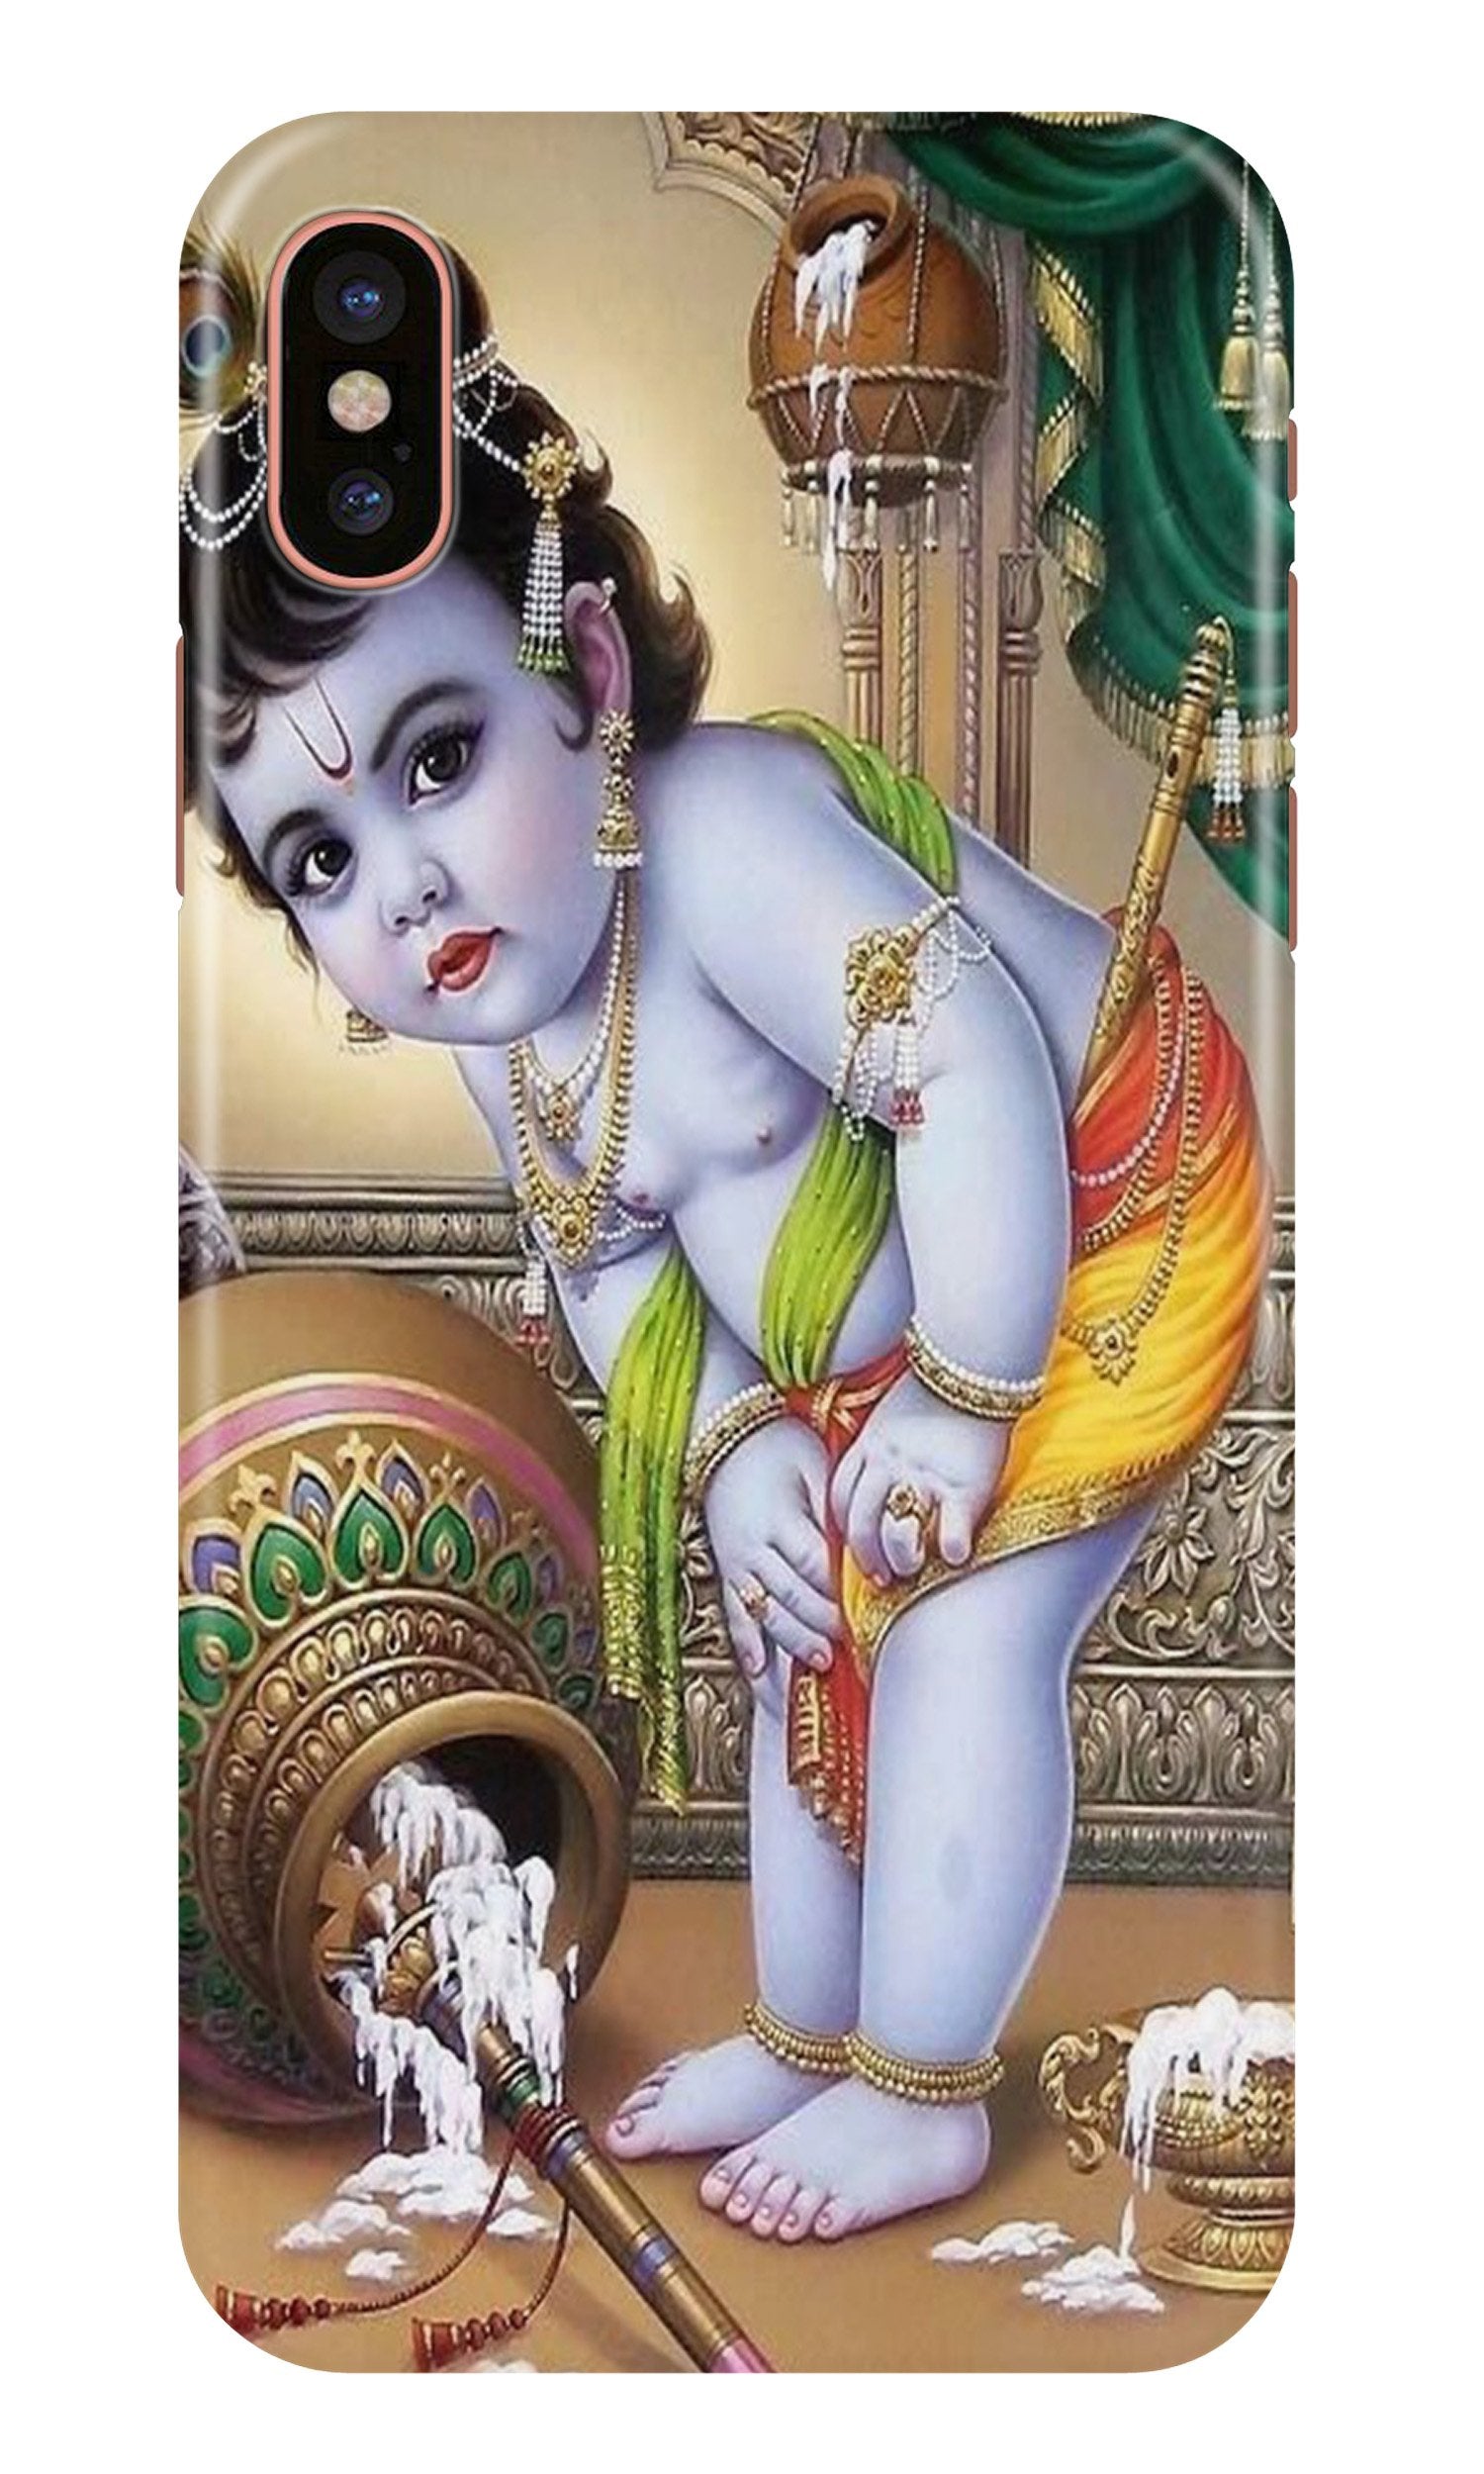 Bal Gopal2 Case for iPhone X